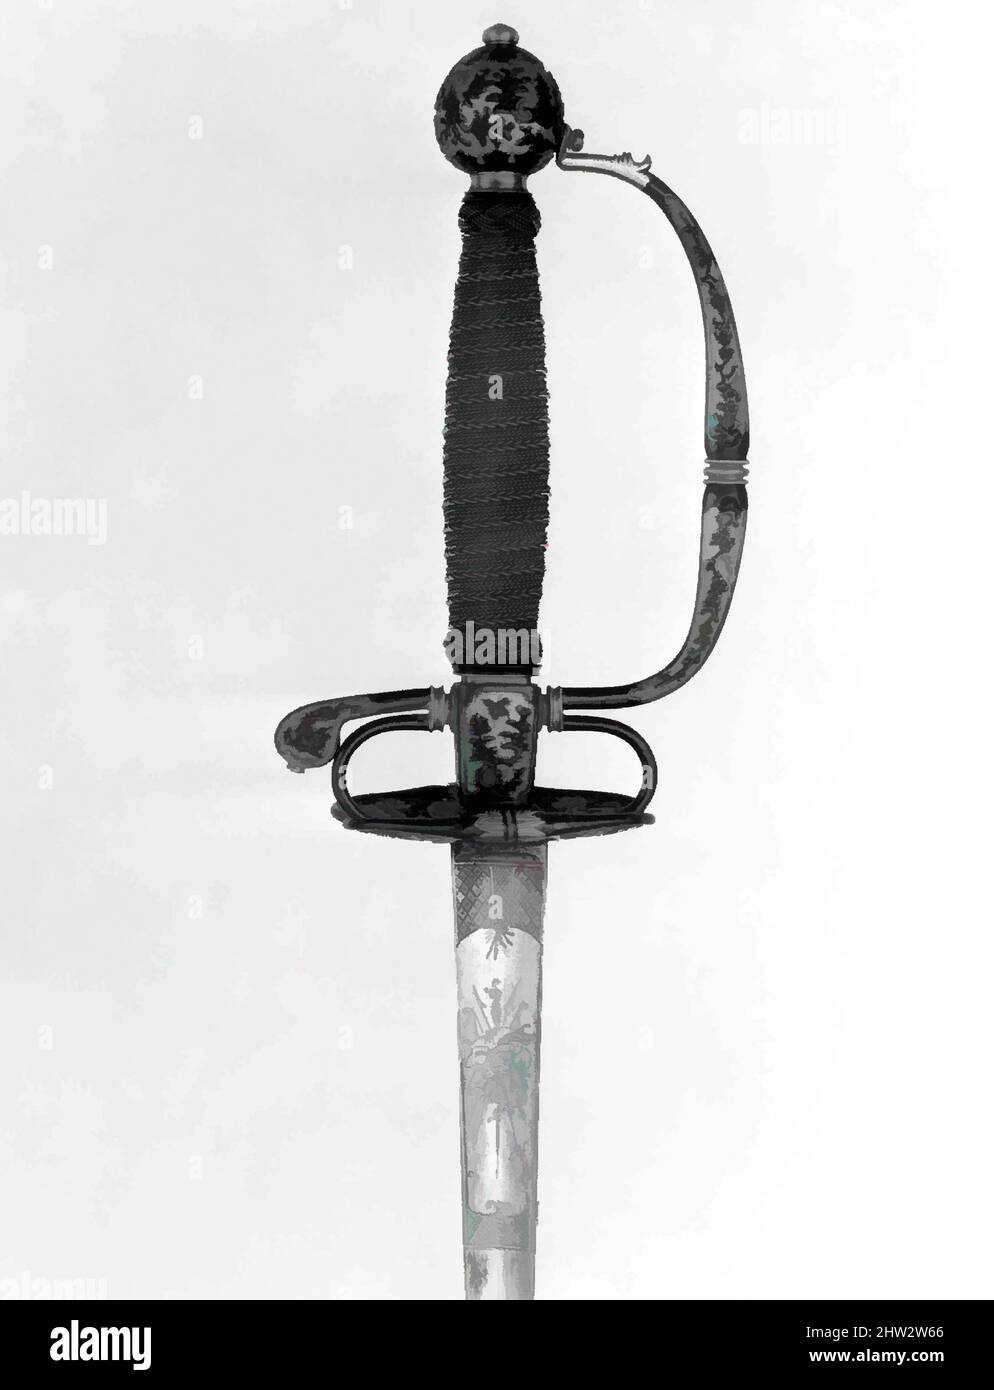 Art inspired by Smallsword Hilt and Blade, ca. 1730, Nagasaki, hilt, Japanese, possibly Dejima; blade, European, Steel, copper-gold alloy (shakudō), gold, Hilt (a); L. approx. 7 in. (17.8 cm); W. approx. 4 in. (10.2 cm); Wt. 5.3 oz. (150.3 g); blade (b); L. 40 1/8 in. (101.9 cm); Wt. 5, Classic works modernized by Artotop with a splash of modernity. Shapes, color and value, eye-catching visual impact on art. Emotions through freedom of artworks in a contemporary way. A timeless message pursuing a wildly creative new direction. Artists turning to the digital medium and creating the Artotop NFT Stock Photo